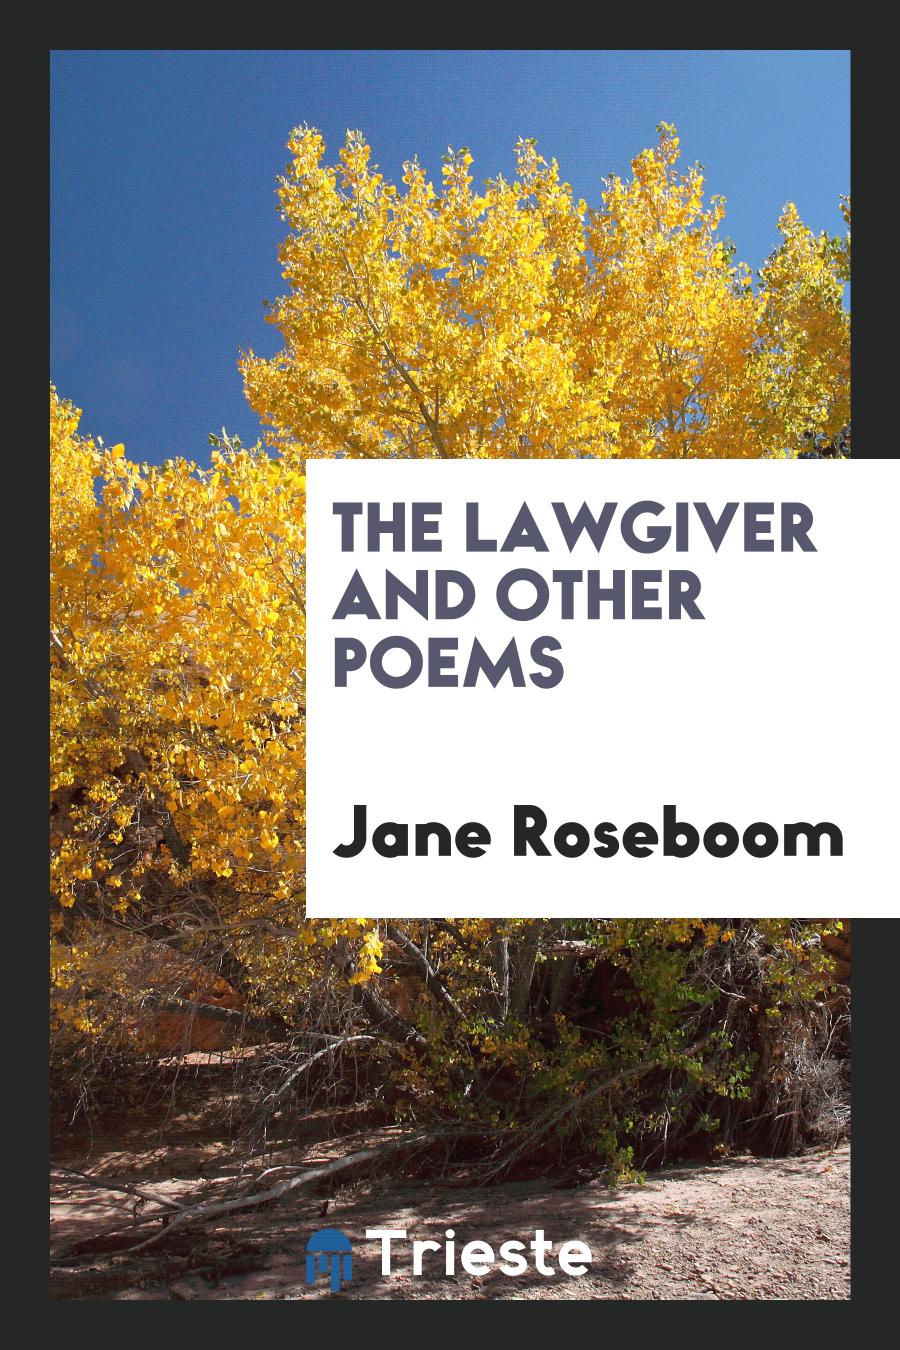 The Lawgiver and Other Poems